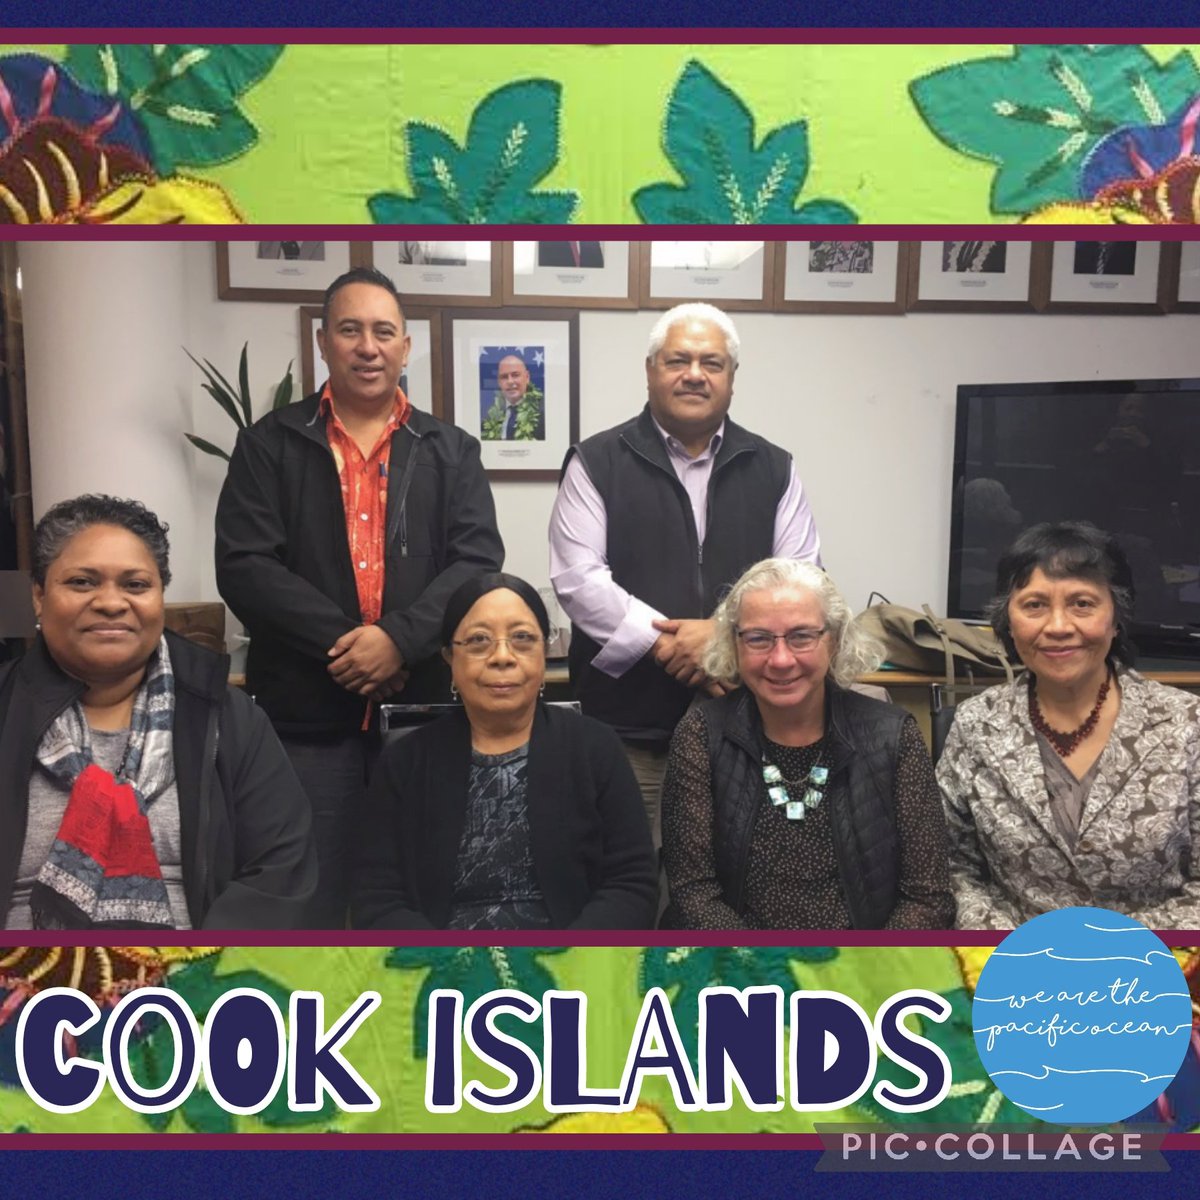 Following our successful #maurlelei and #mouilelei fonos, we had the privilege of meeting with the Cook Islands Secretary of Health- We will soon make a very exciting announcement! 🌺🇨🇰🌴